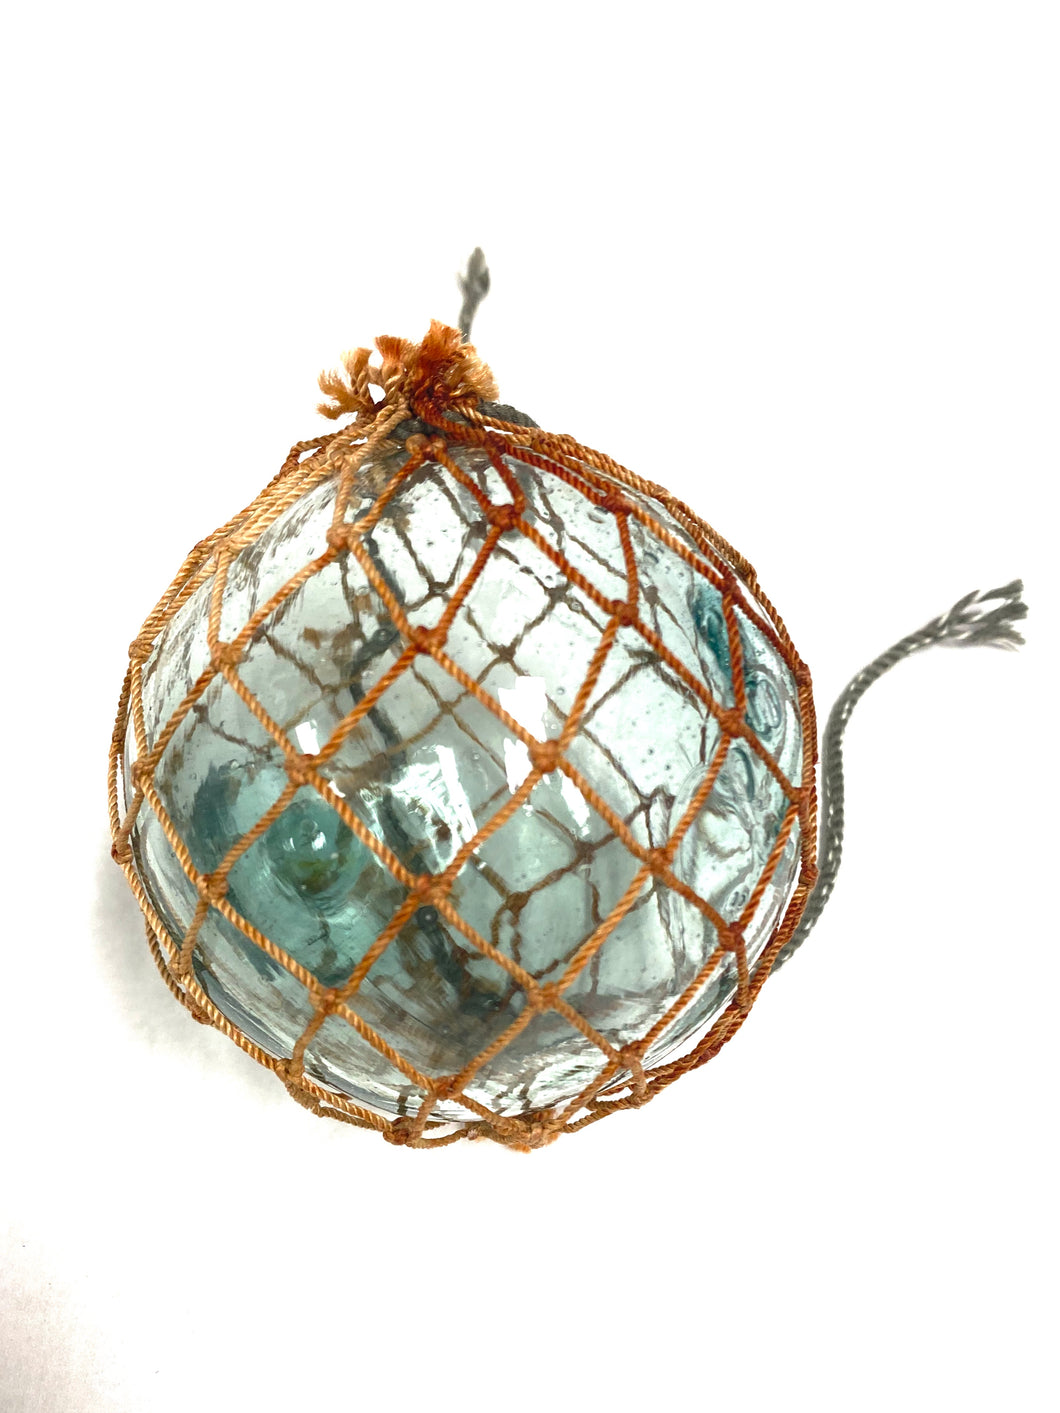 Glass Ball With Netting